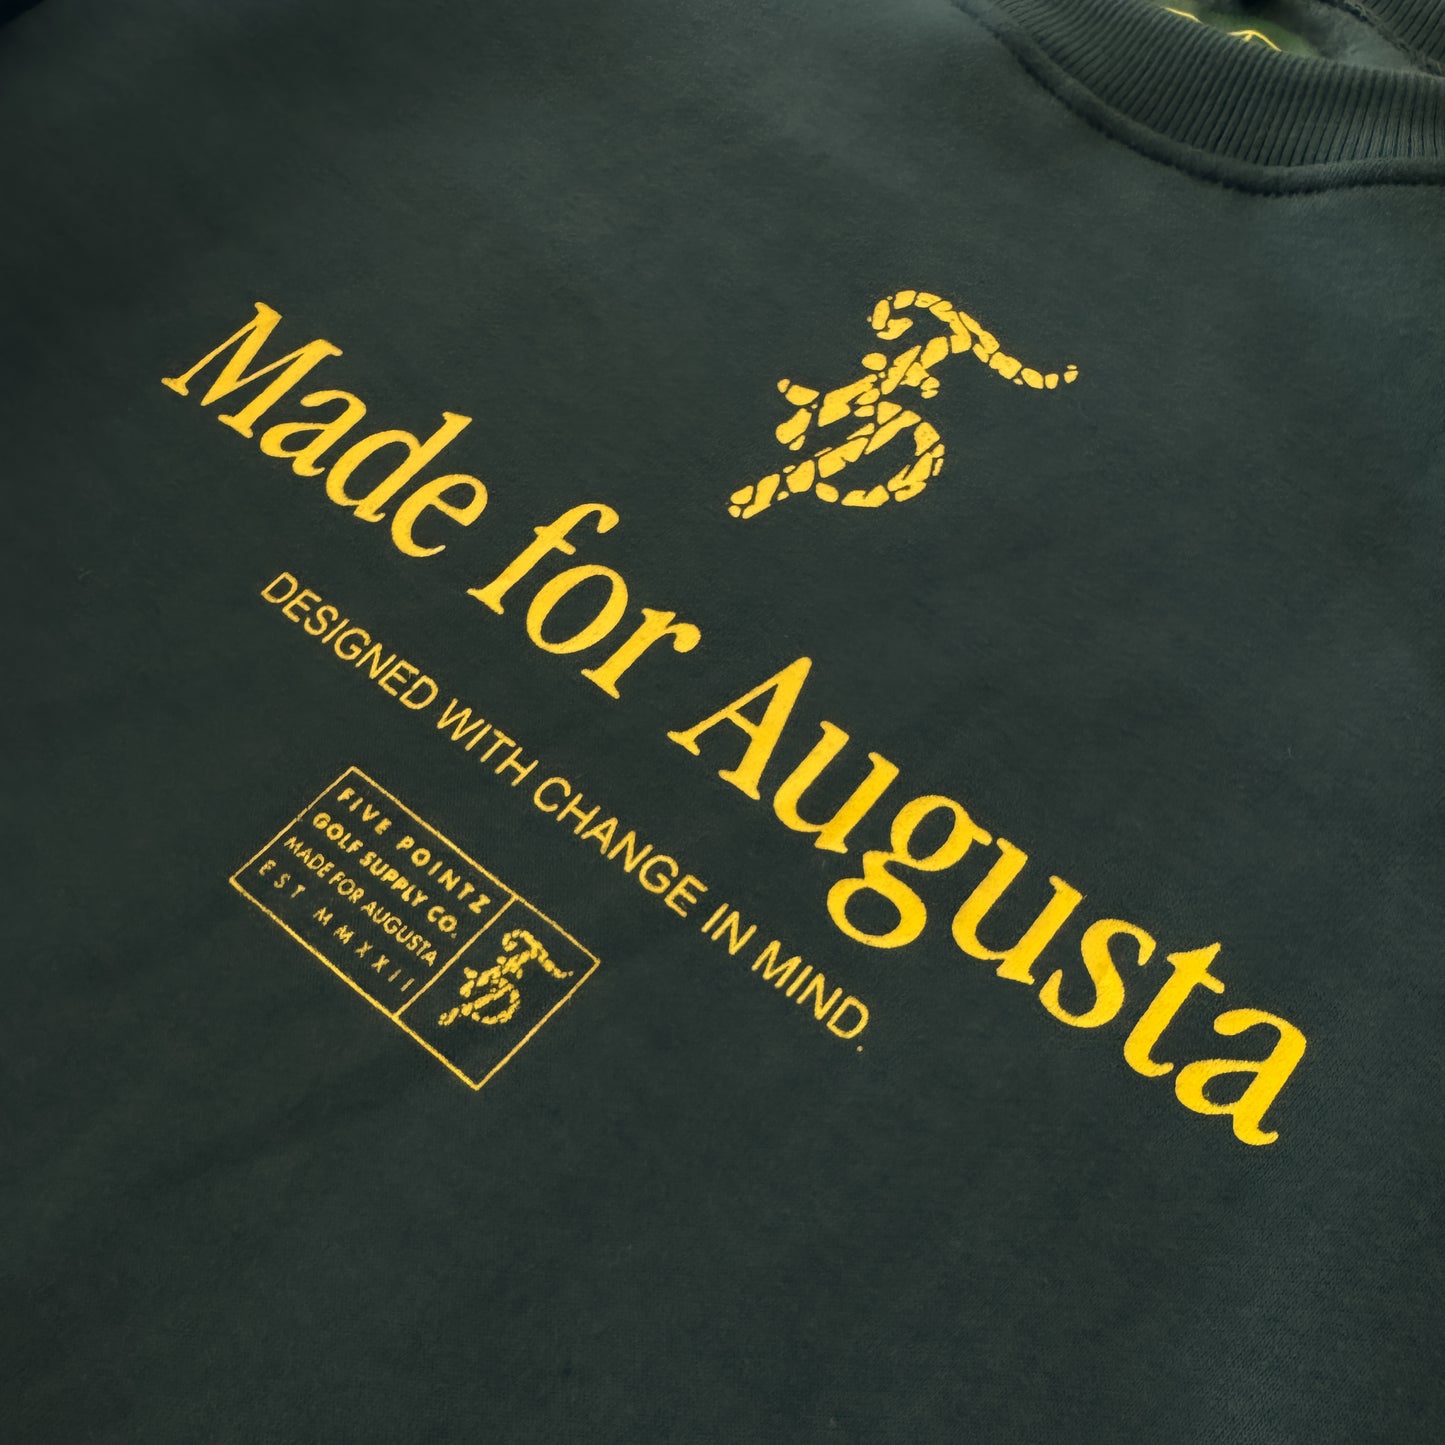 EARLY ACCESS Made for Augusta Crewneck